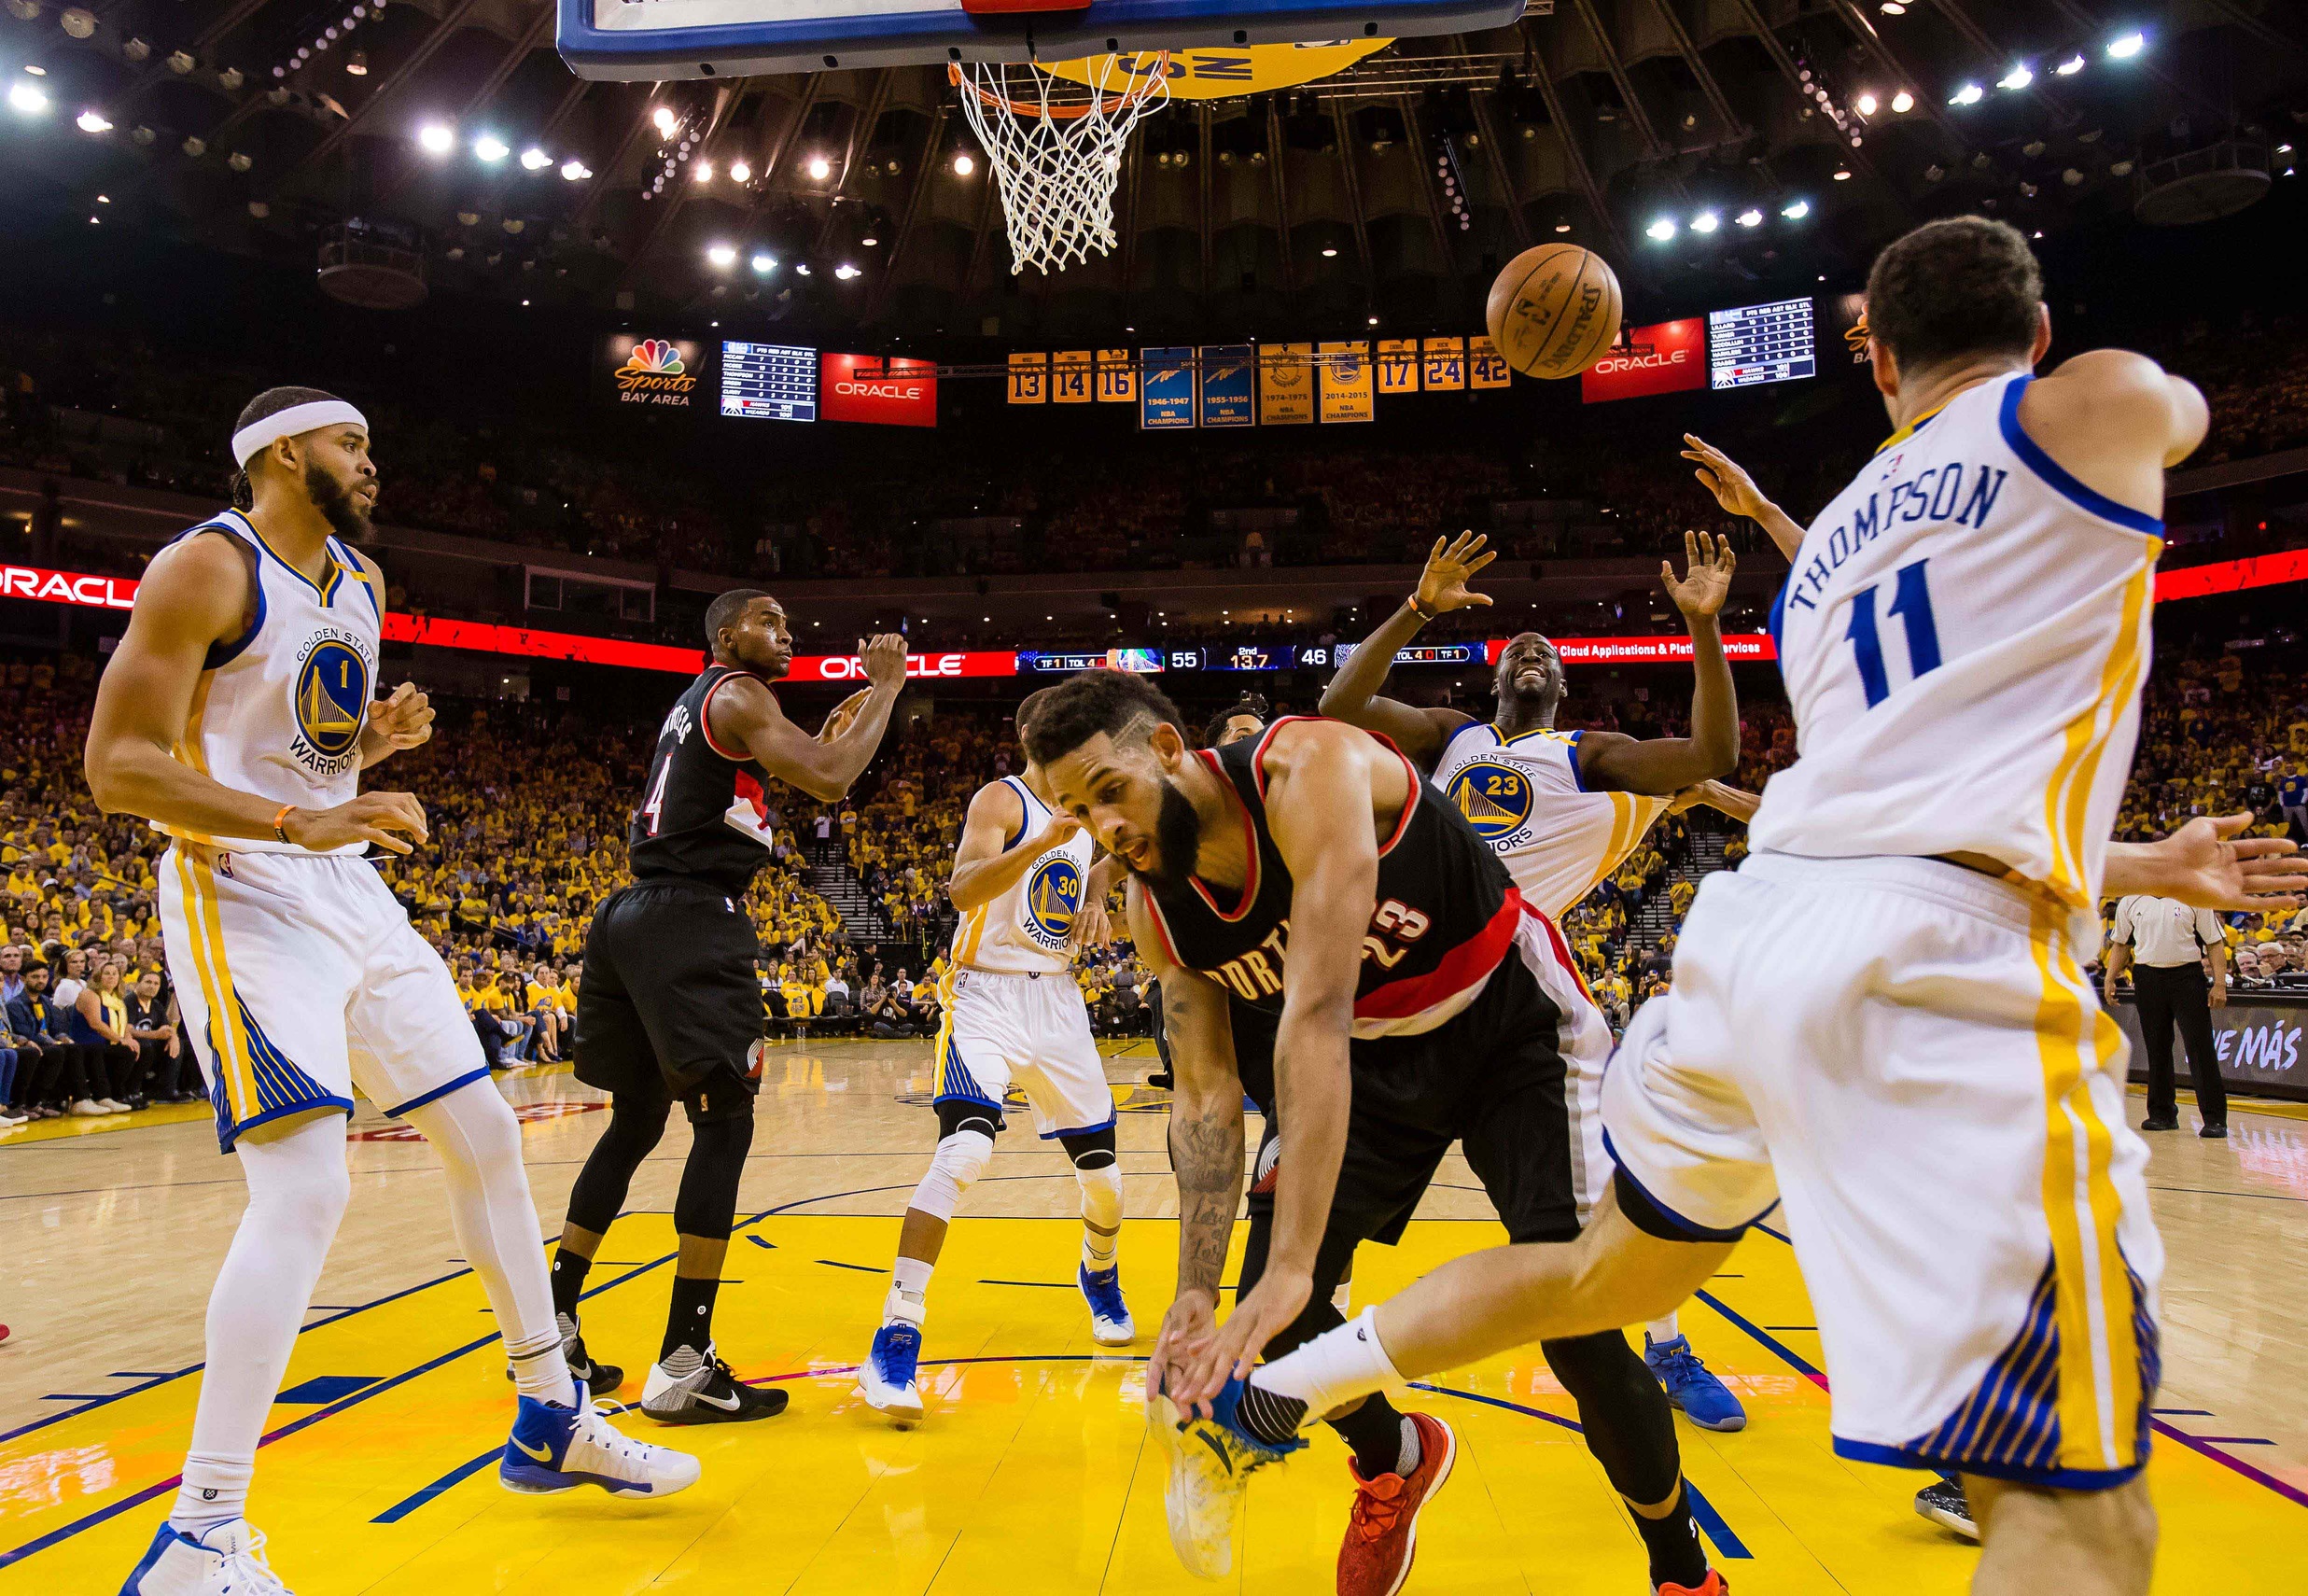 Apr 19, 2017; Oakland, CA, USA; Golden State Warriors guard Klay Thompson (11) passes the pass to forward Draymond Green (23) against Portland Trail Blazers guard Allen Crabbe (23) during the second quarter in game two of the first round of the 2017 NBA Playoffs at Oracle Arena. The Golden State Warriors defeated the Portland Trail Blazers 110-81. Mandatory Credit: Kelley L Cox-USA TODAY Sports